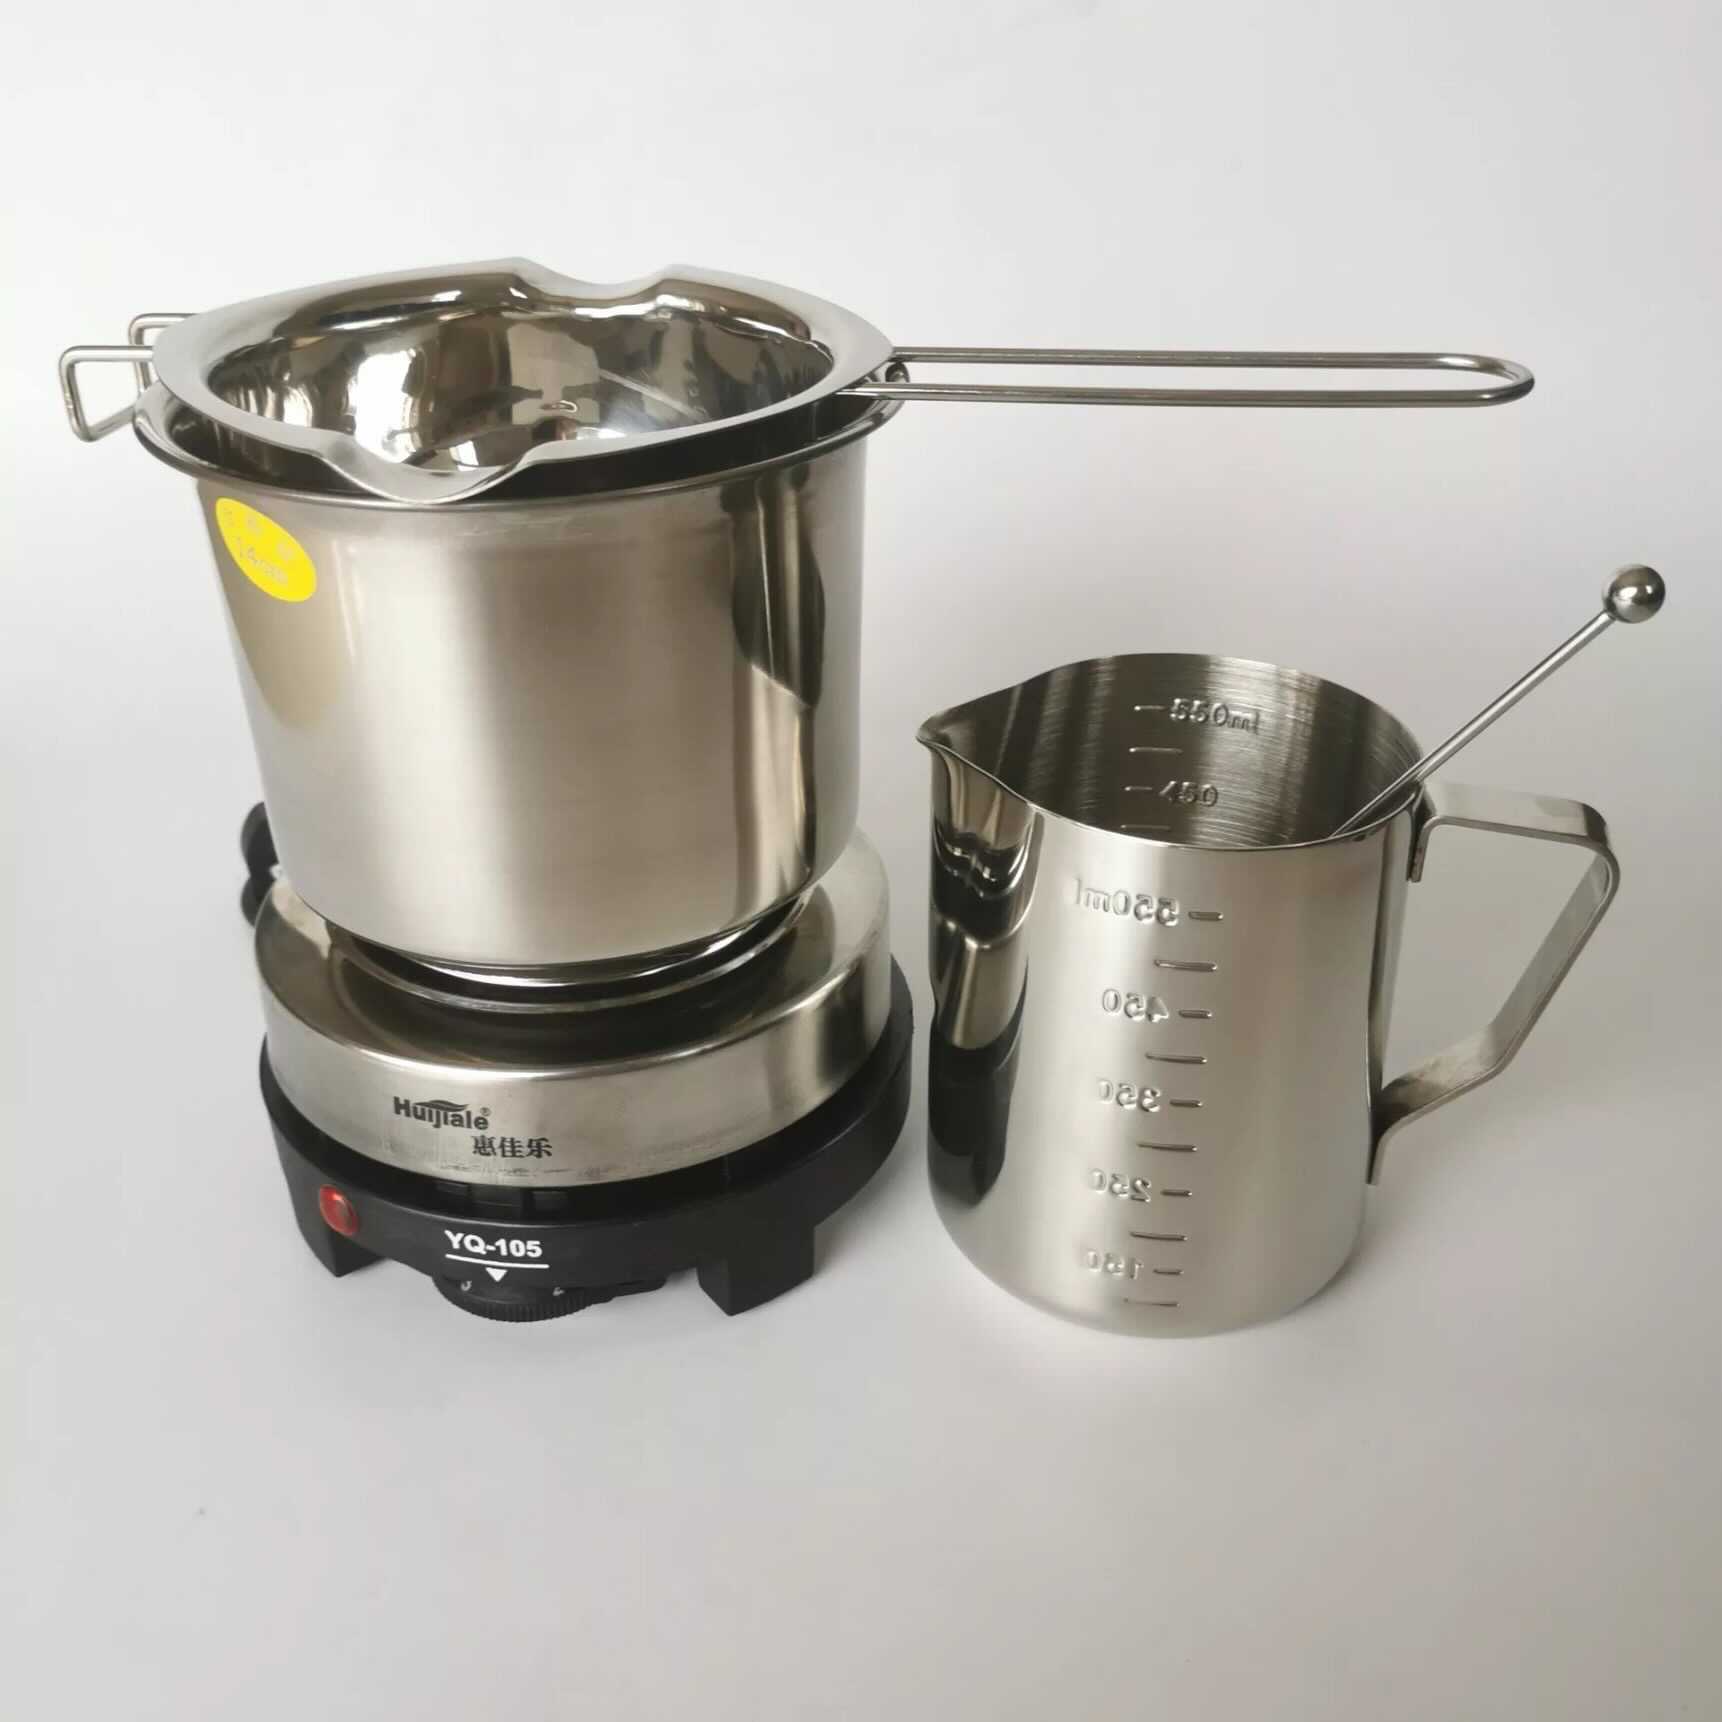 Wax Melter For Candle Making